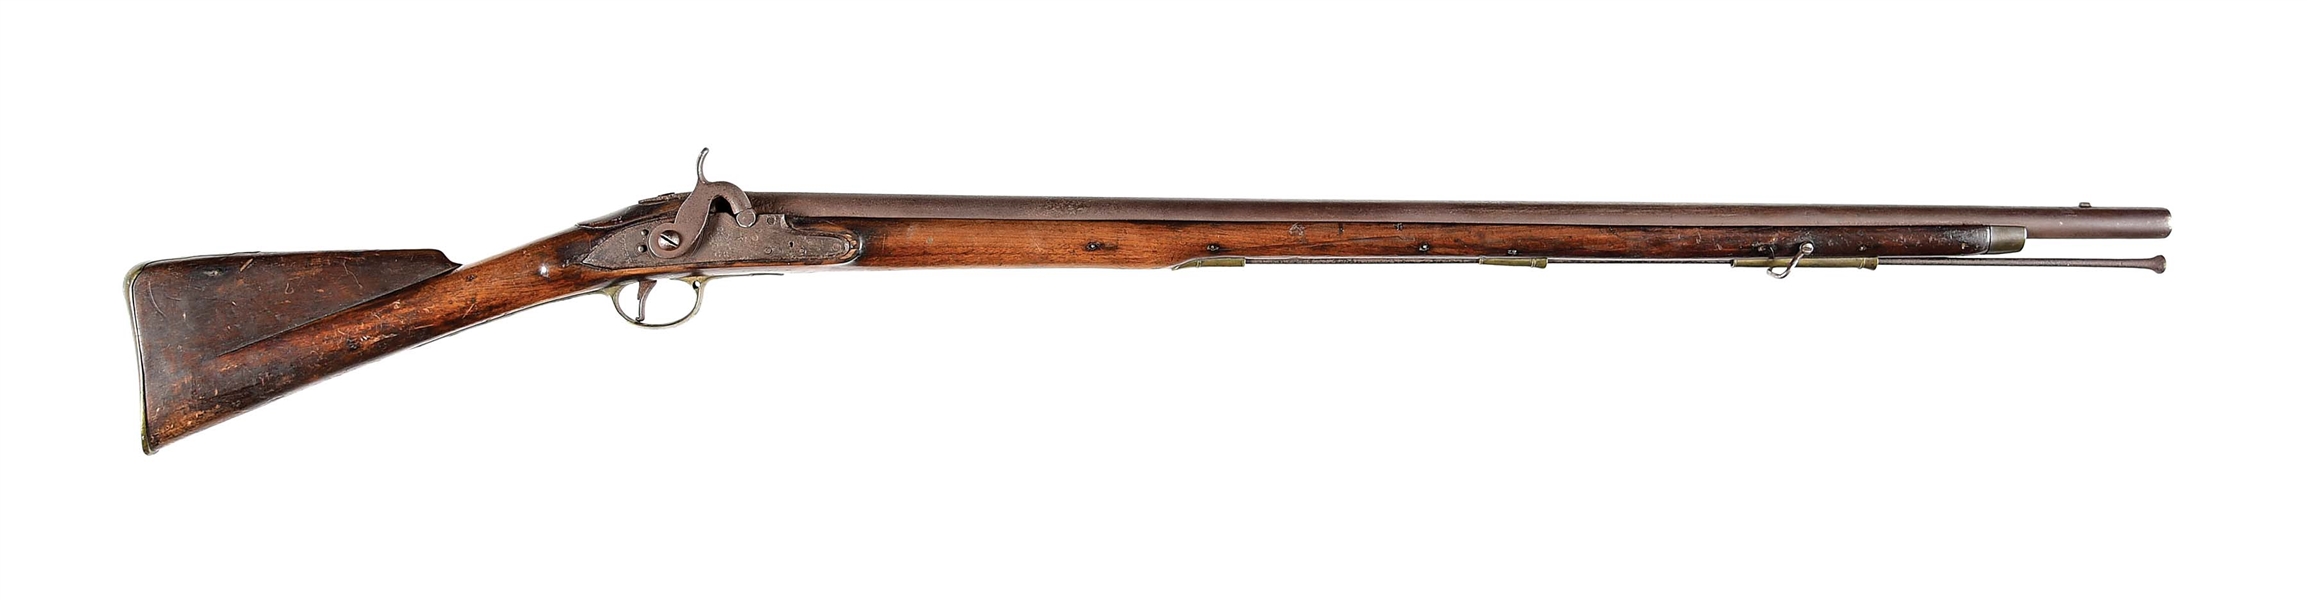 (A) SCARCE 49TH REGIMENT-MARKED PATTERN 1793 BROWN BESS MUSKET.